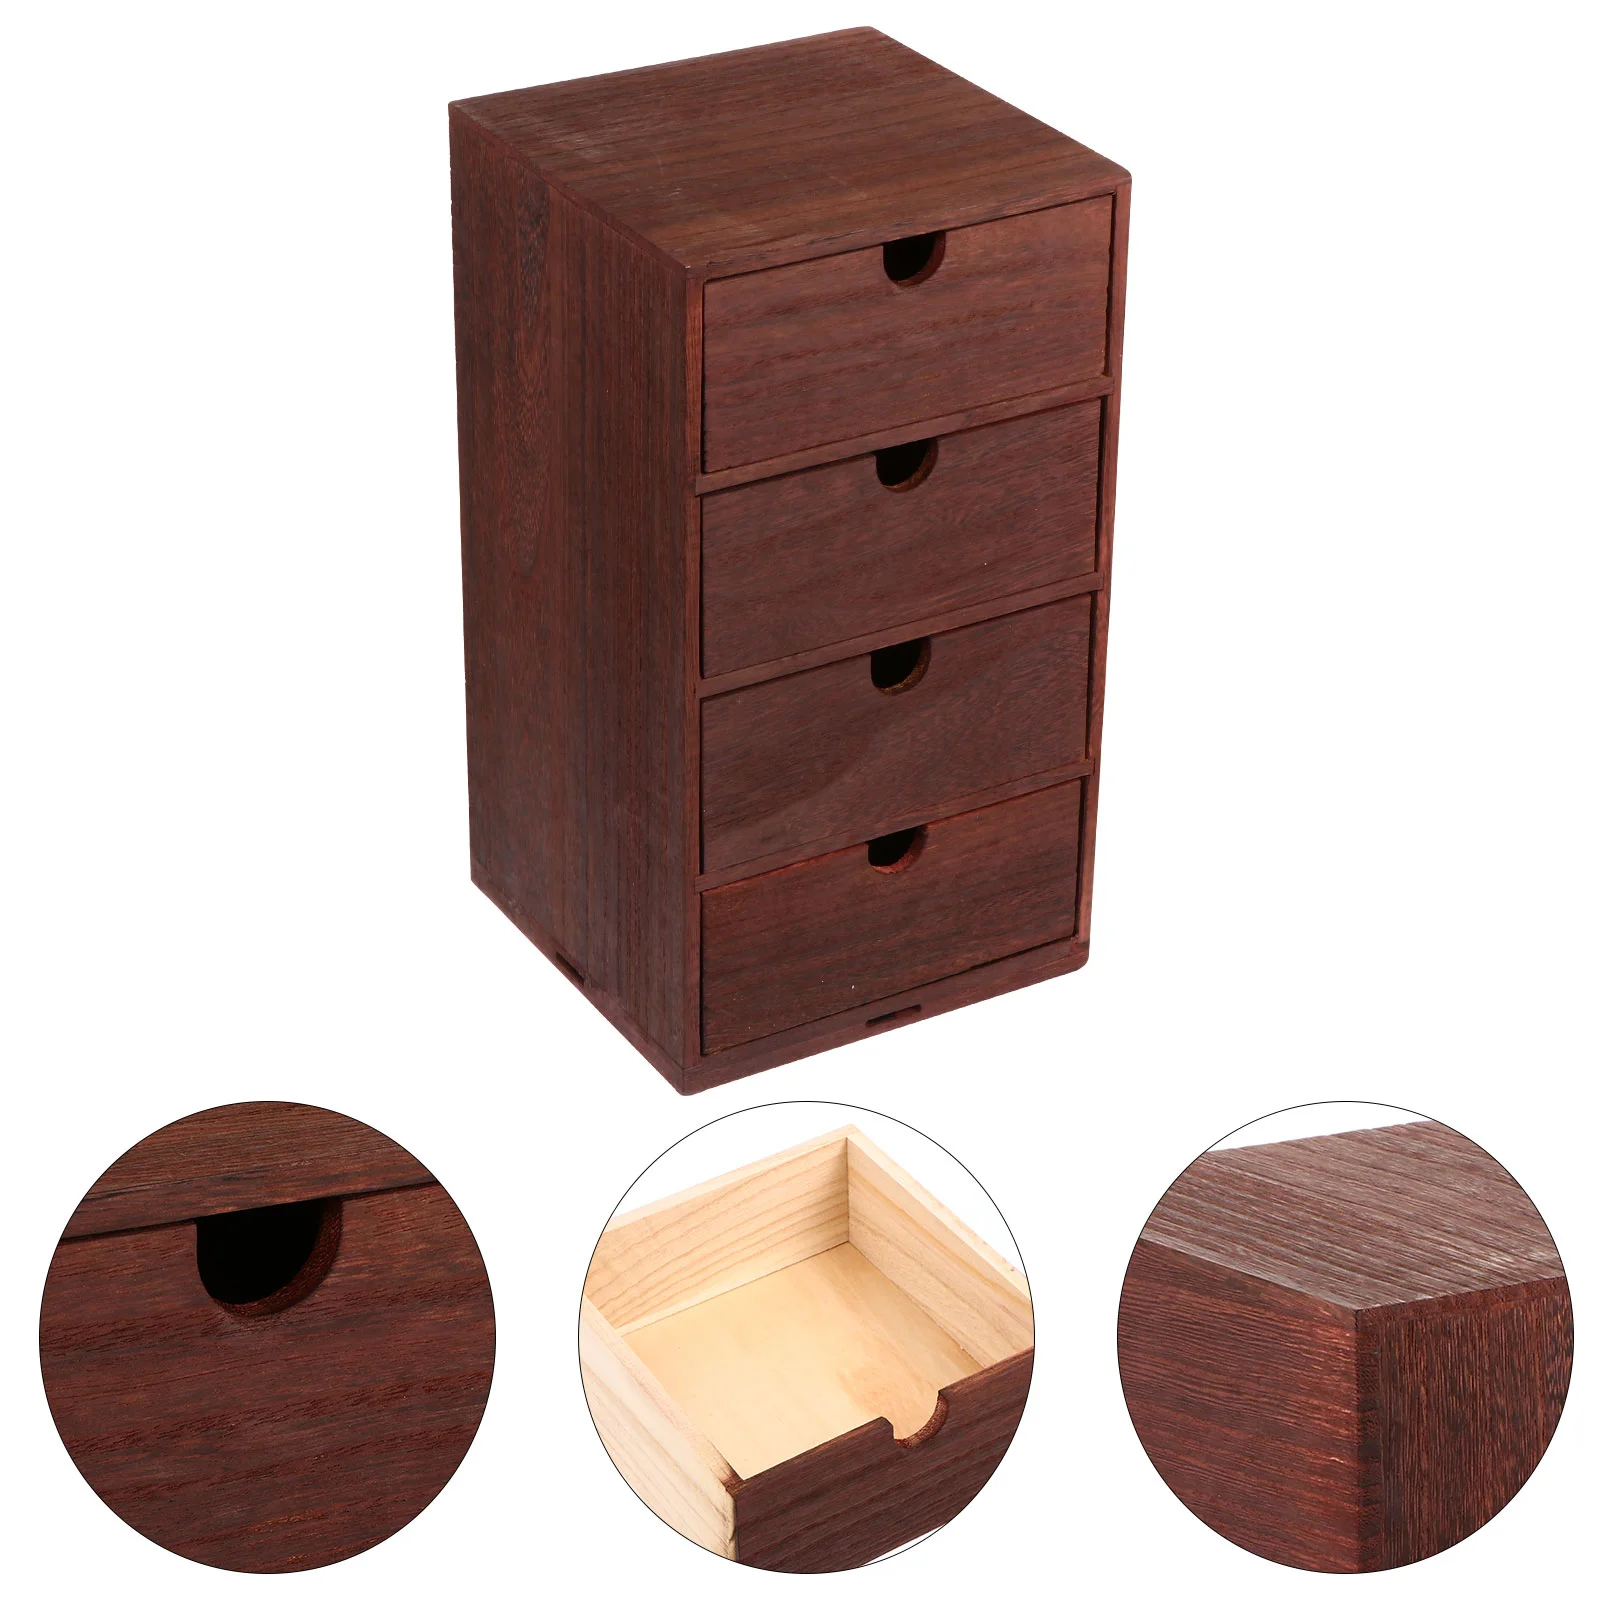 Wooden Storage Box Desktop Drawer Organizer Wood Outdoor Bins Crates Tabletop Cabinet Desk Mini Dresser Cube Boxes Drawers wooden base wood basic frame adjustable indicator combined letter cube pricing price tag